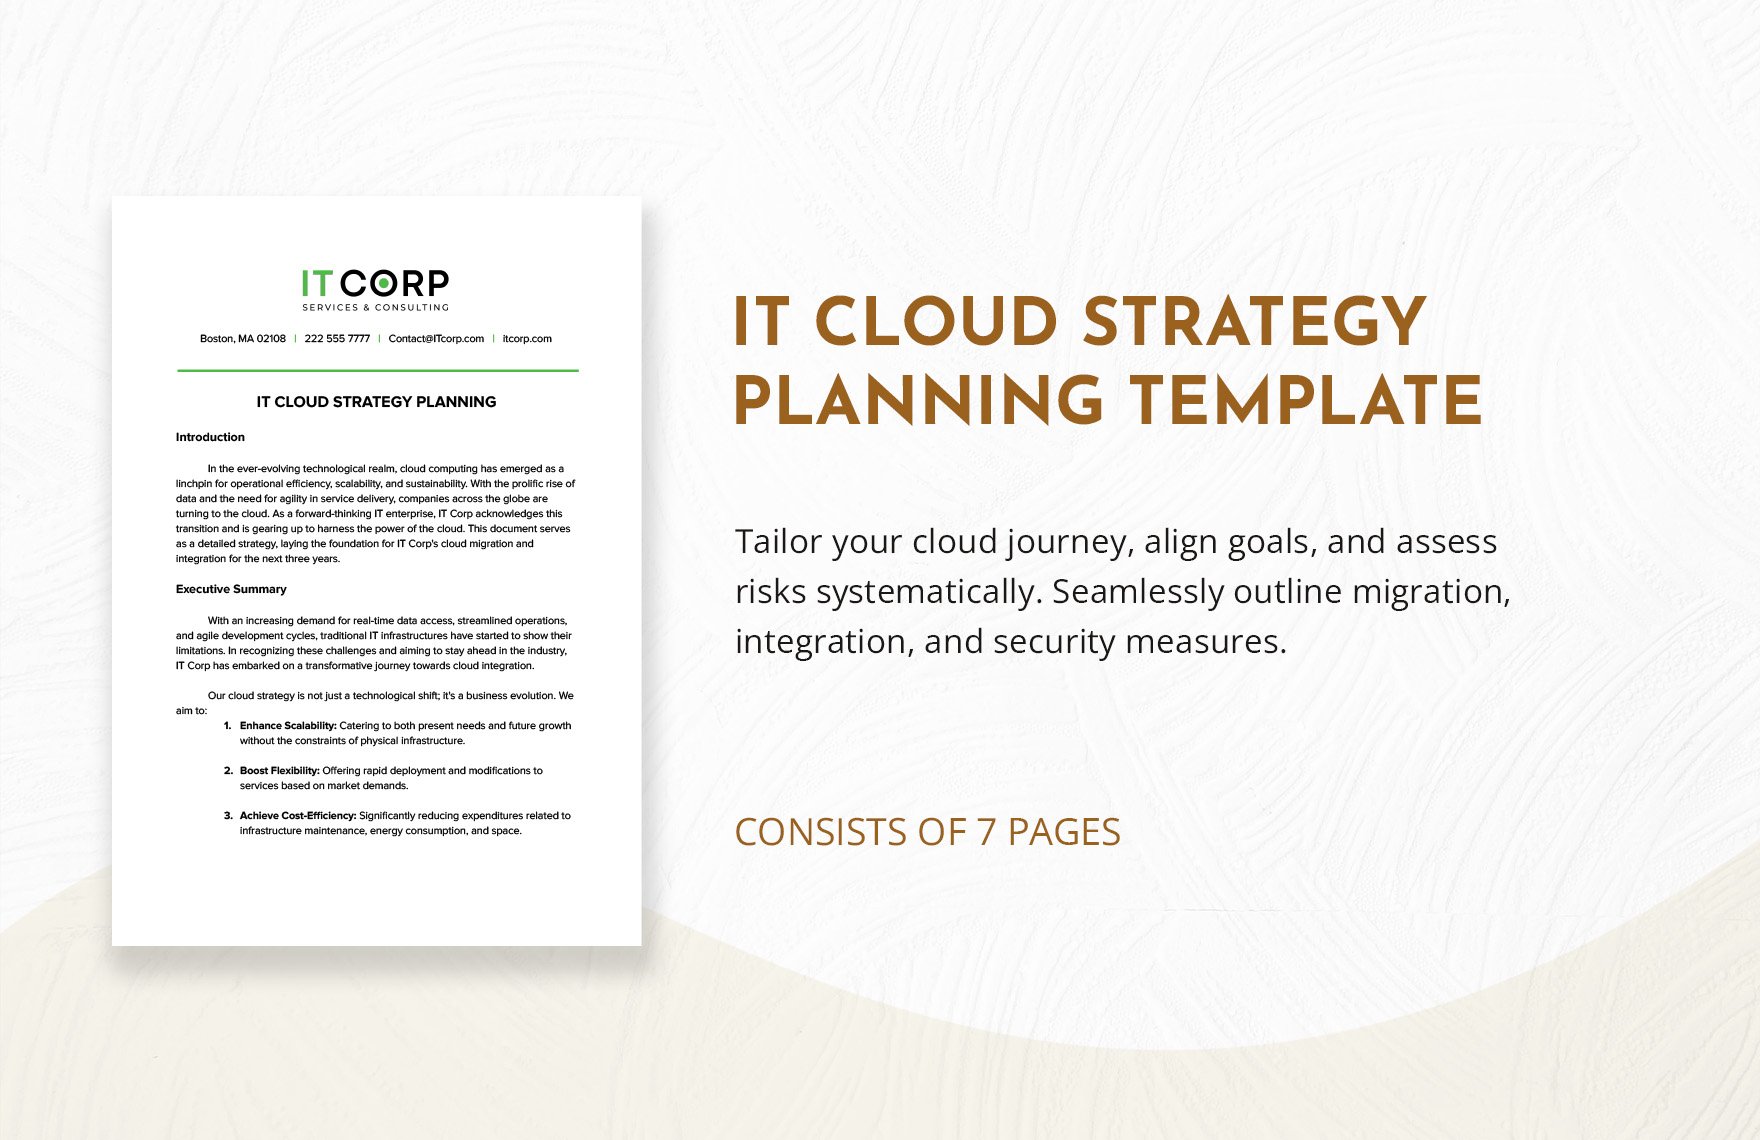 IT Cloud Strategy Planning Template in Word, Google Docs, PDF